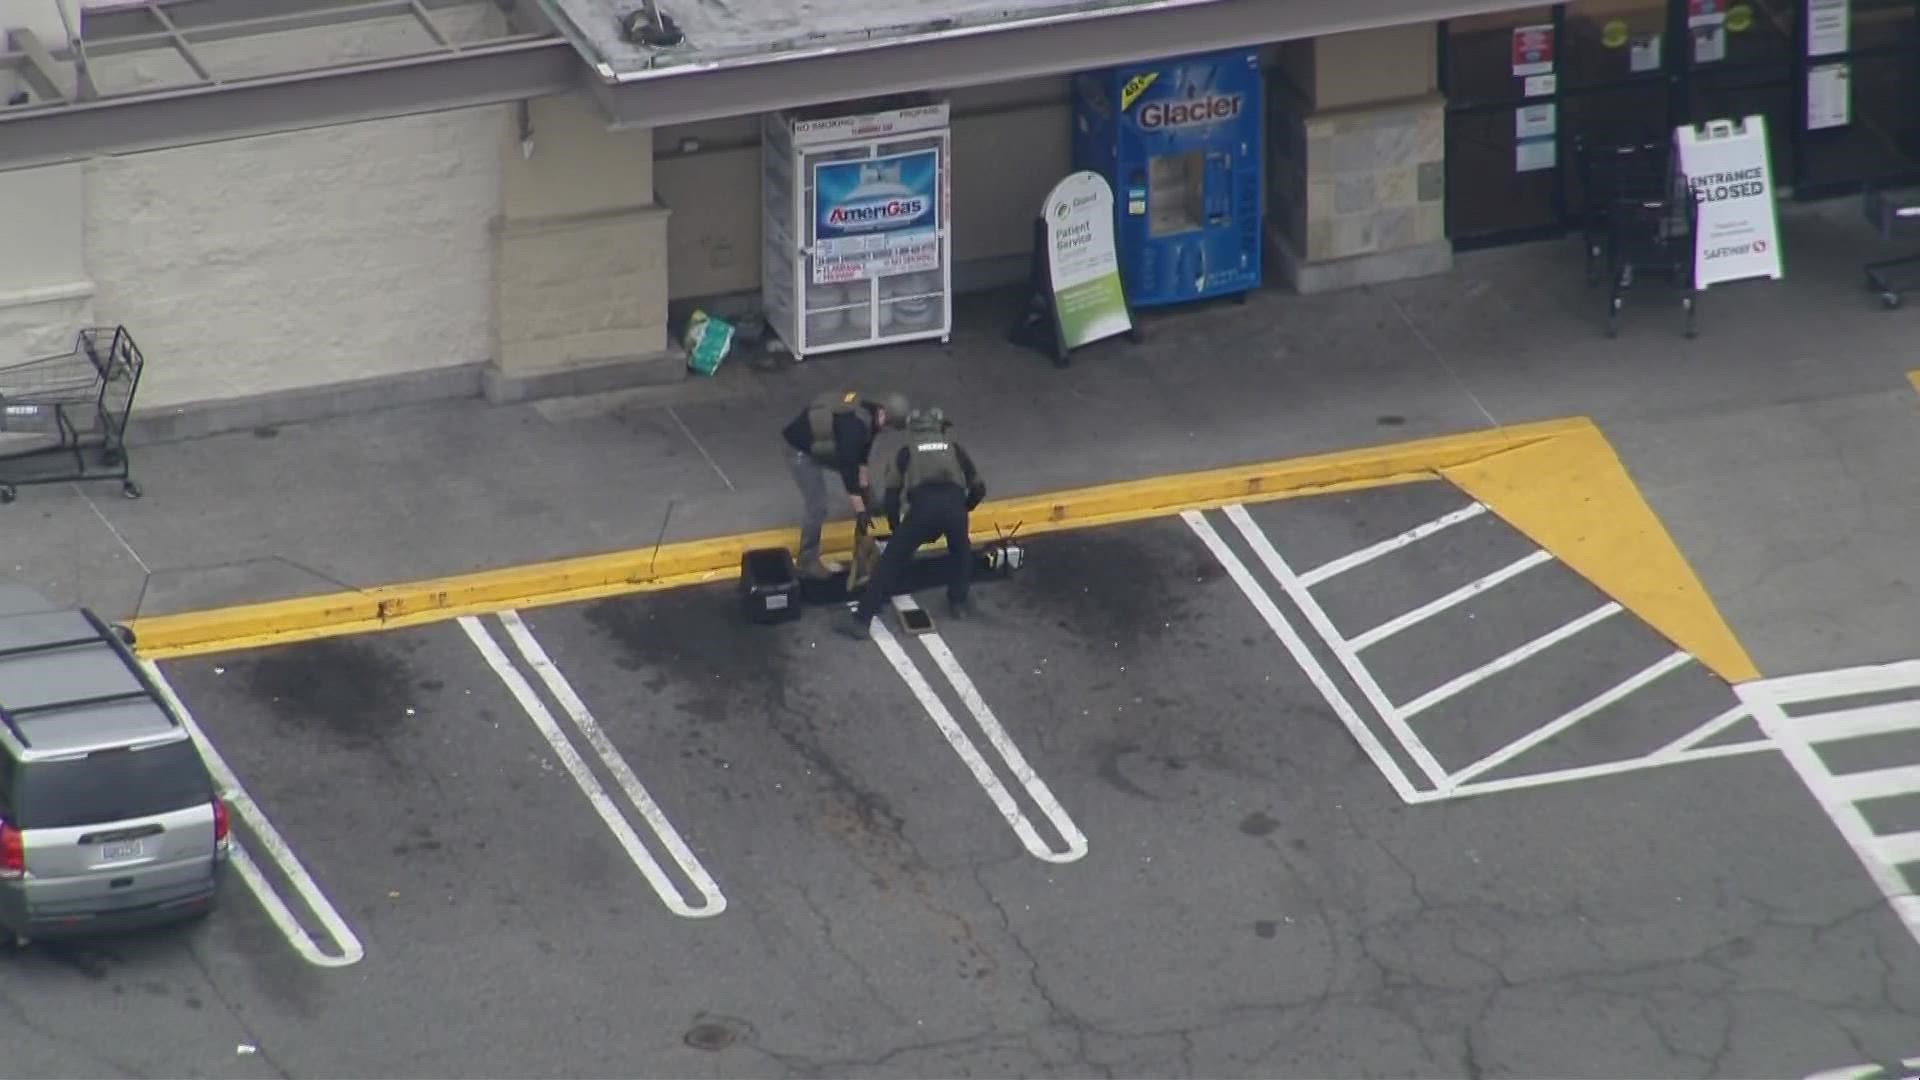 A Safeway was evacuated as law enforcement investigated the scene near Aurora Avenue.